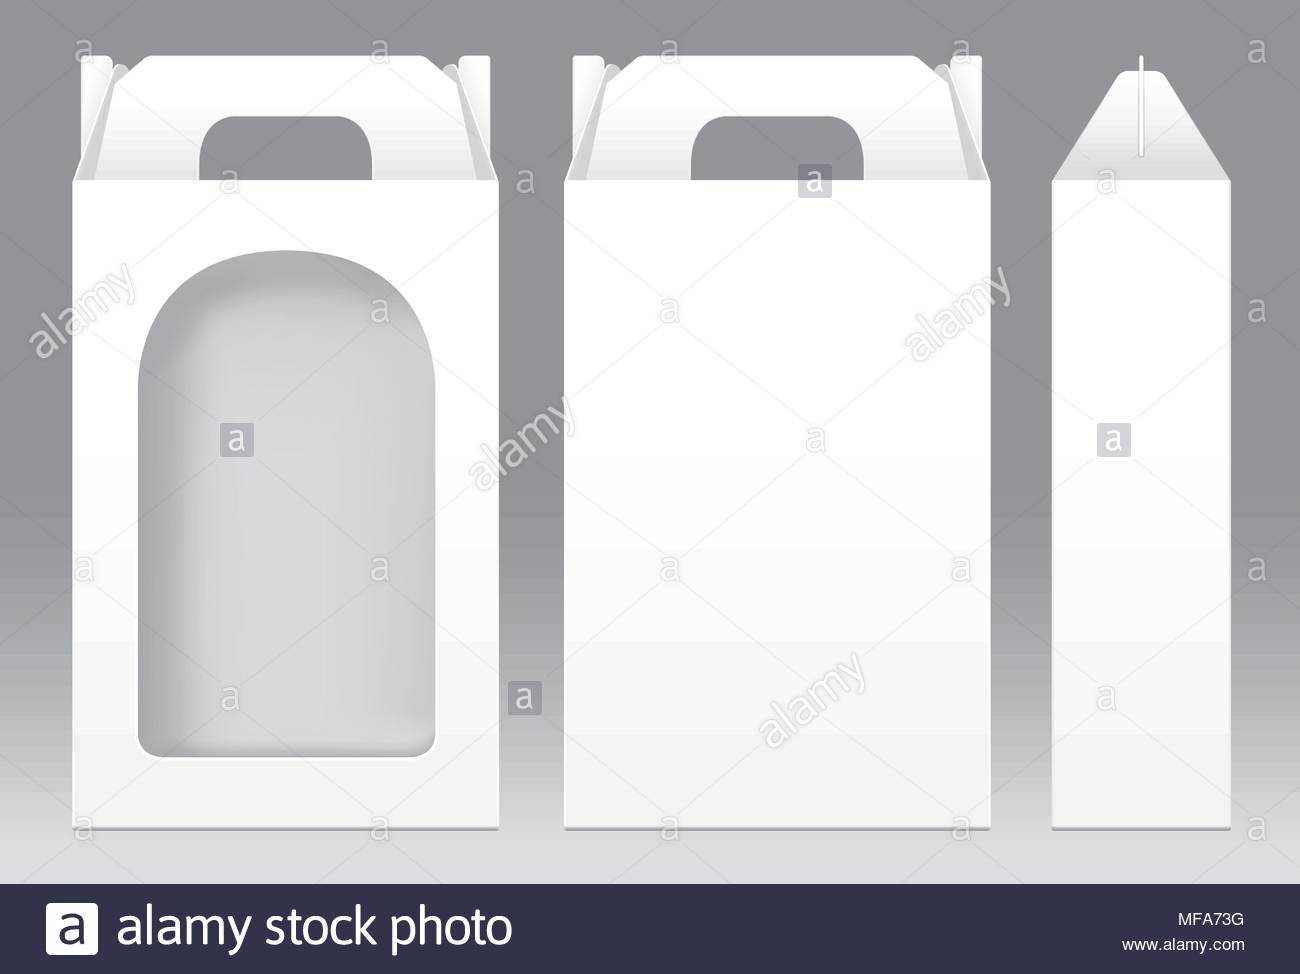 Blank Packaging Stock Photos & Blank Packaging Stock Images In Blank Packaging Templates